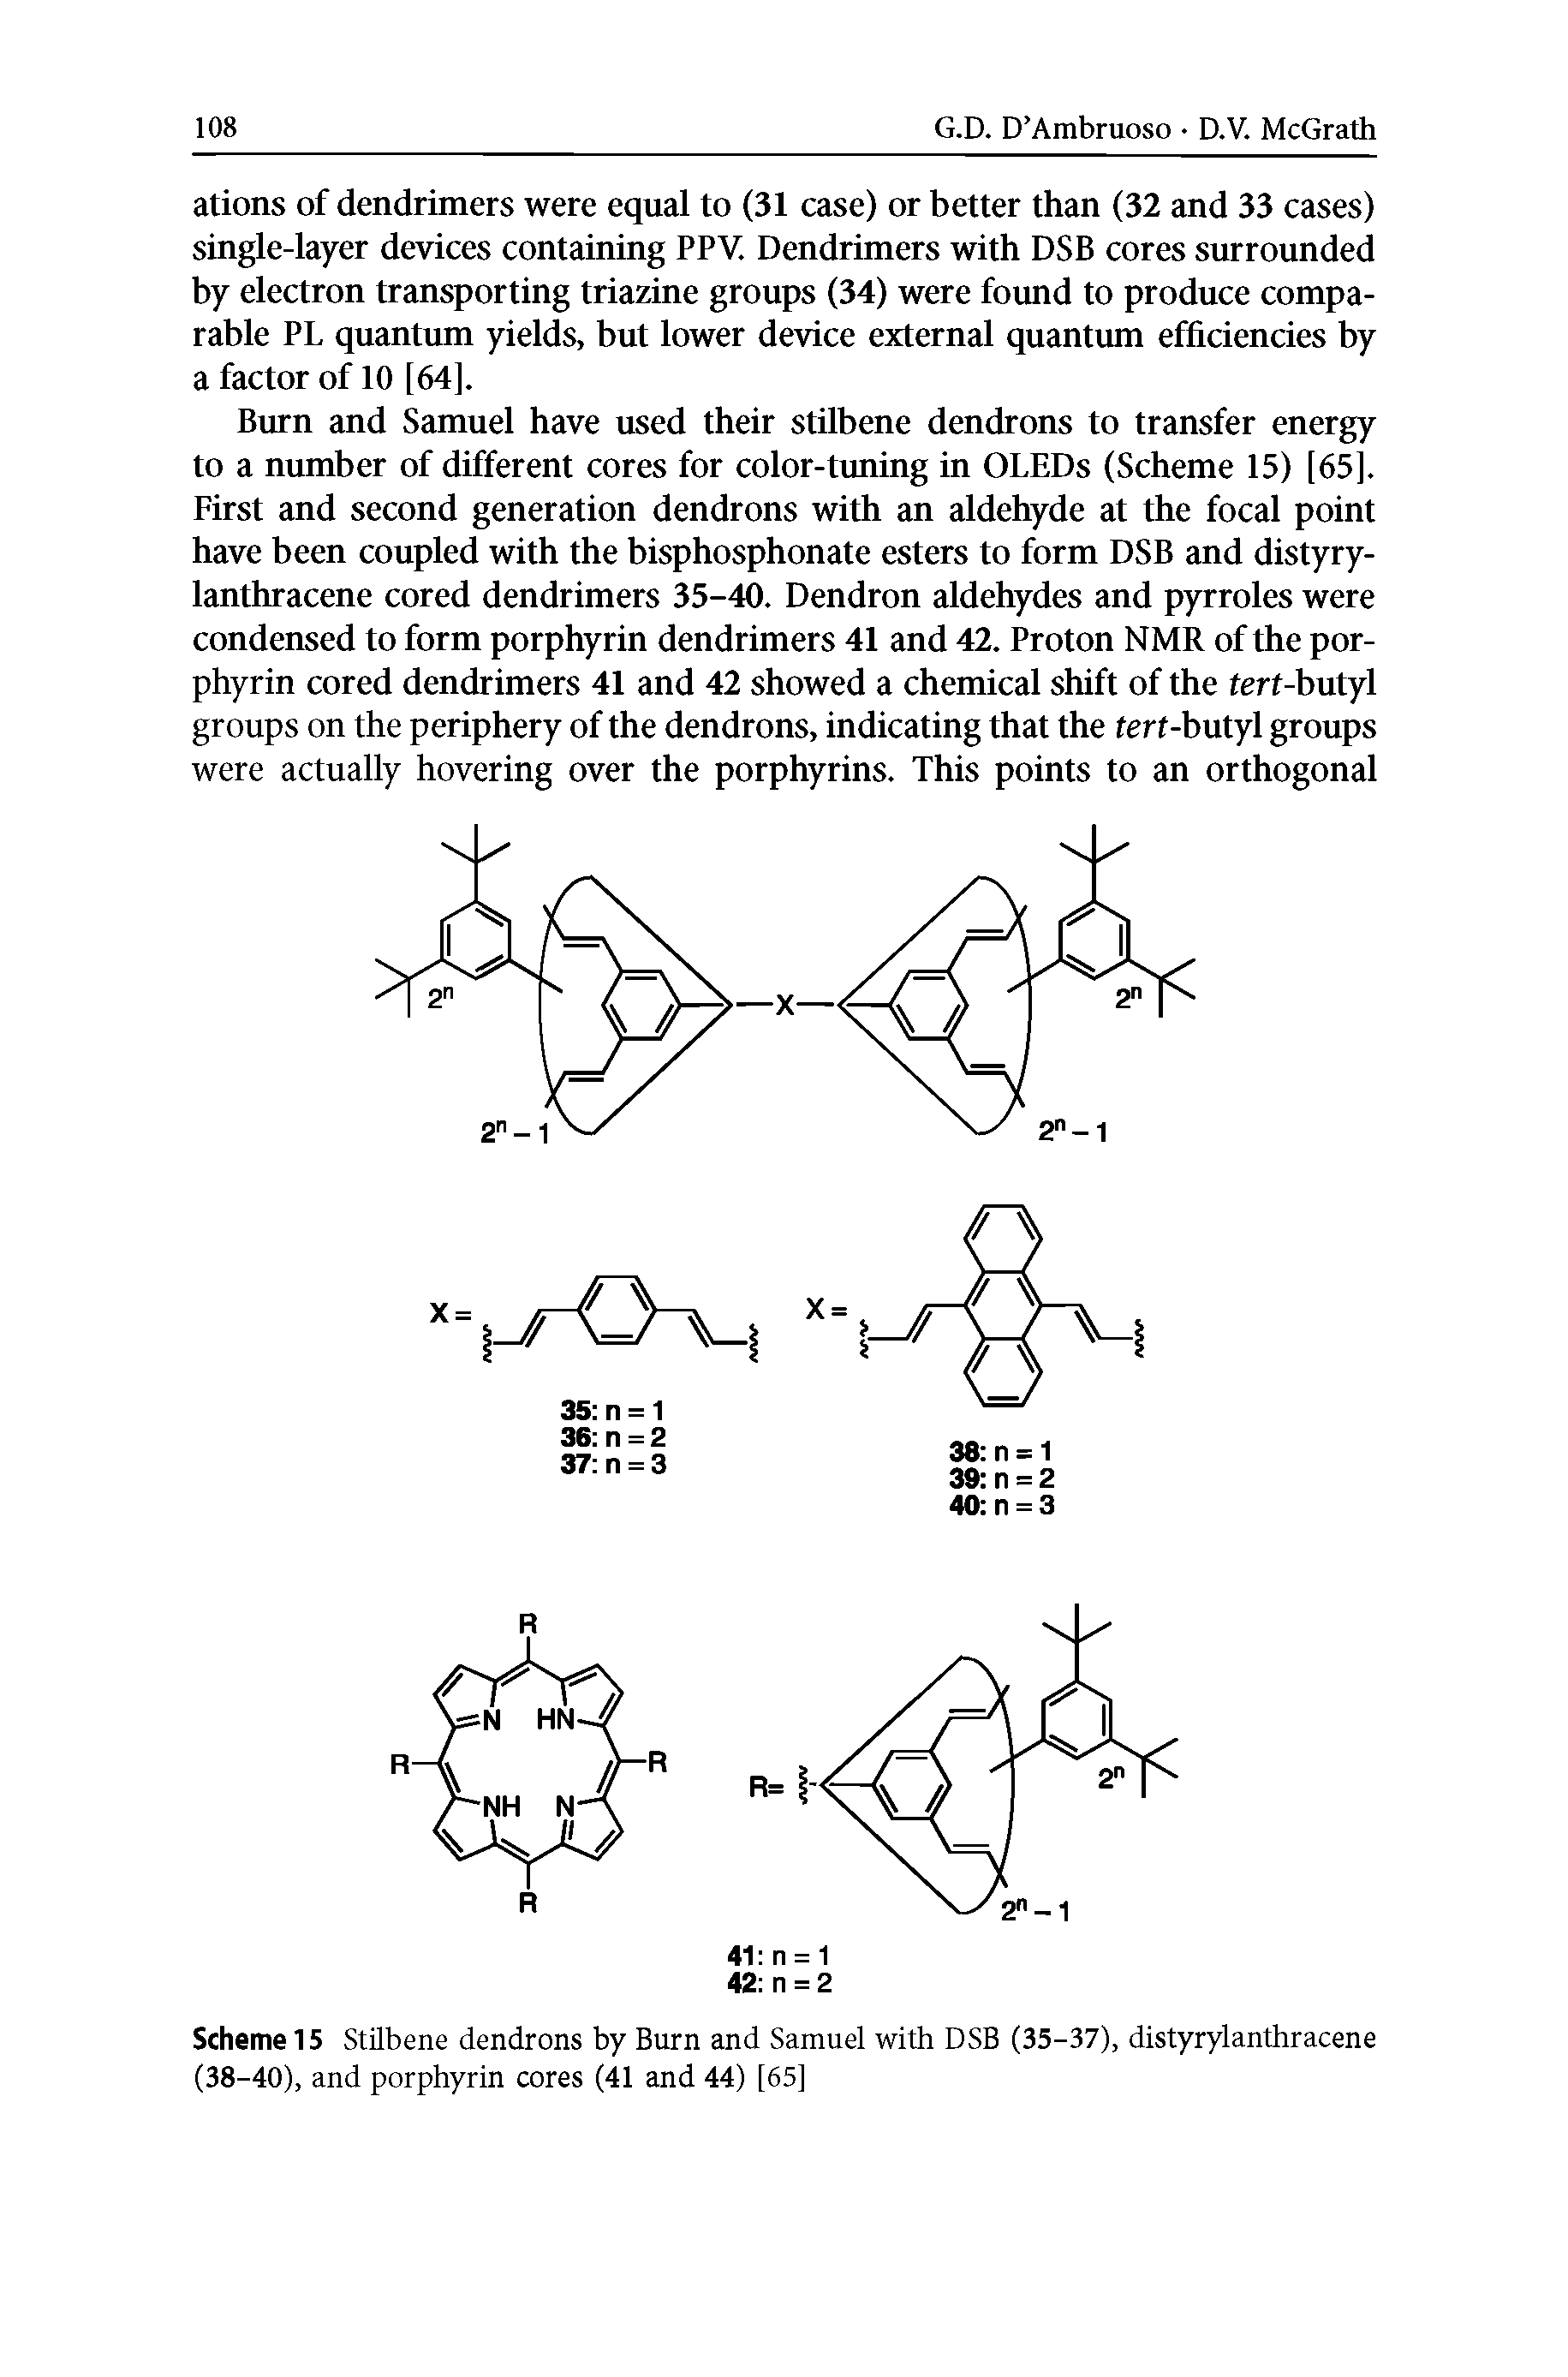 Scheme 15 Stilbene dendrons by Burn and Samuel with DSB (35-37), distyrylanthracene (38-40), and porphyrin cores (41 and 44) [65]...